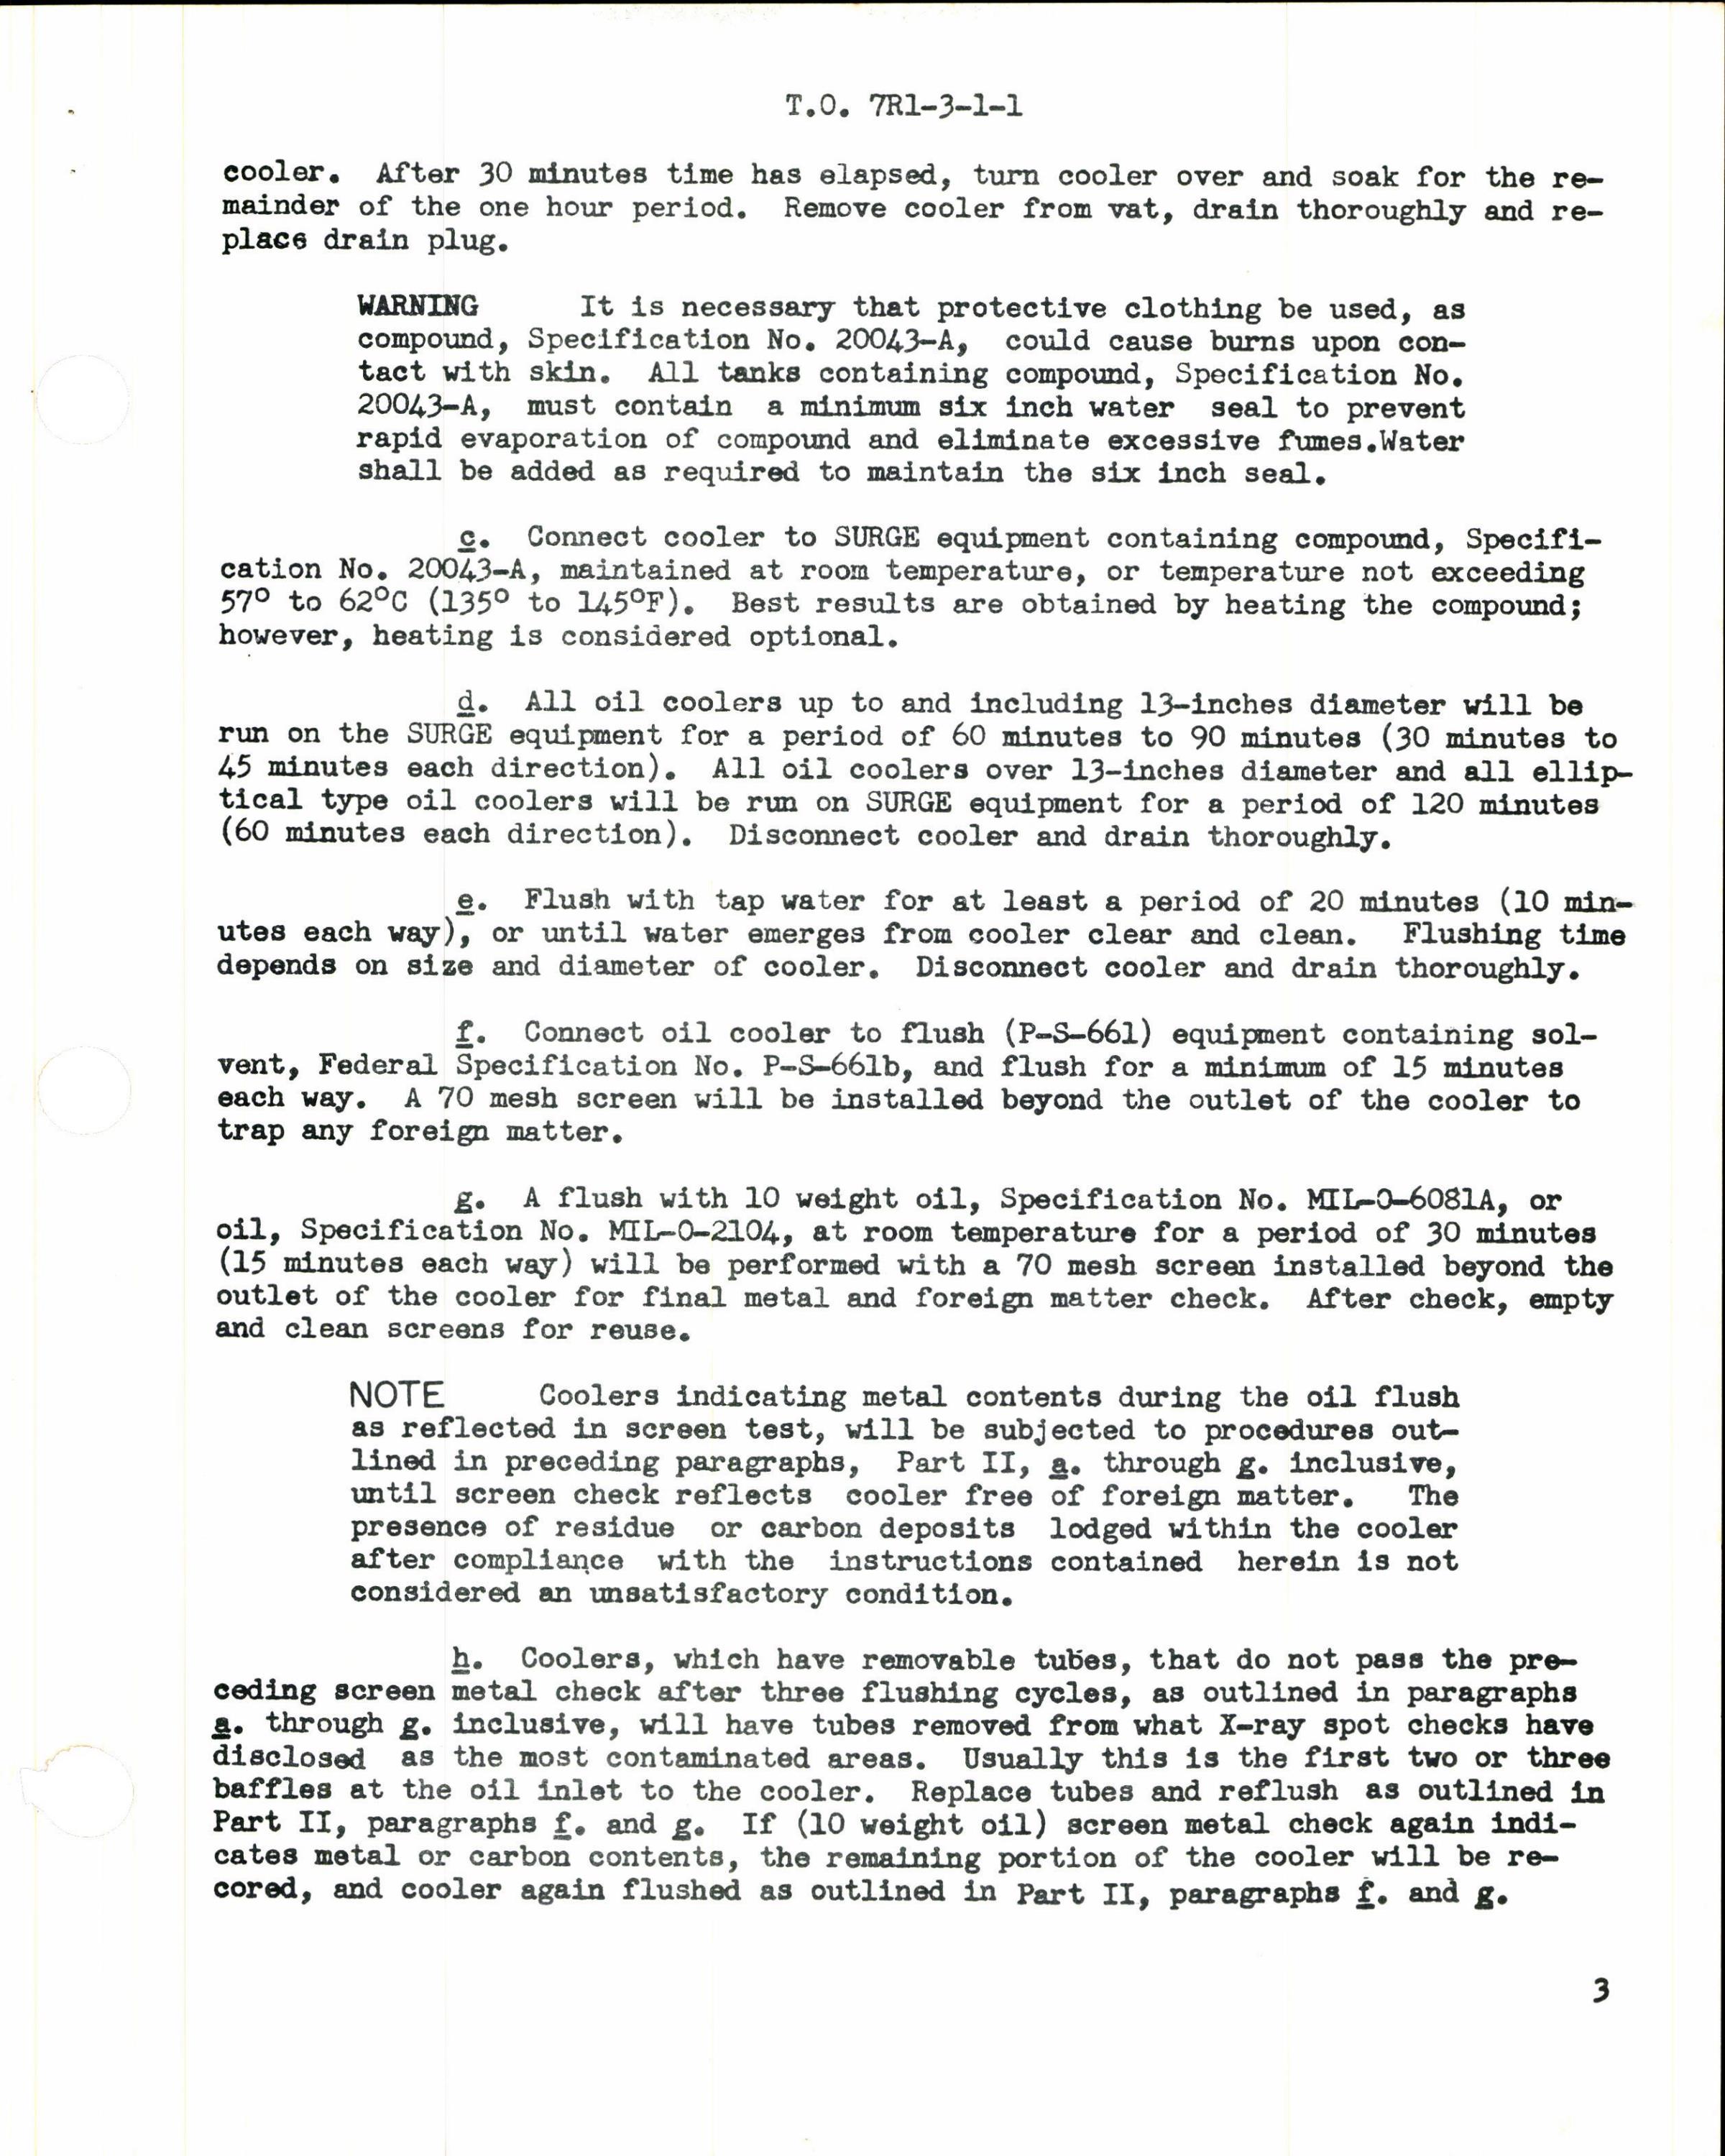 Sample page 3 from AirCorps Library document: Cleaning, Testing, and Corrosive Treatment of Air to Oil, Cooled Aluminum, Brass and Copper type Oil Coolers